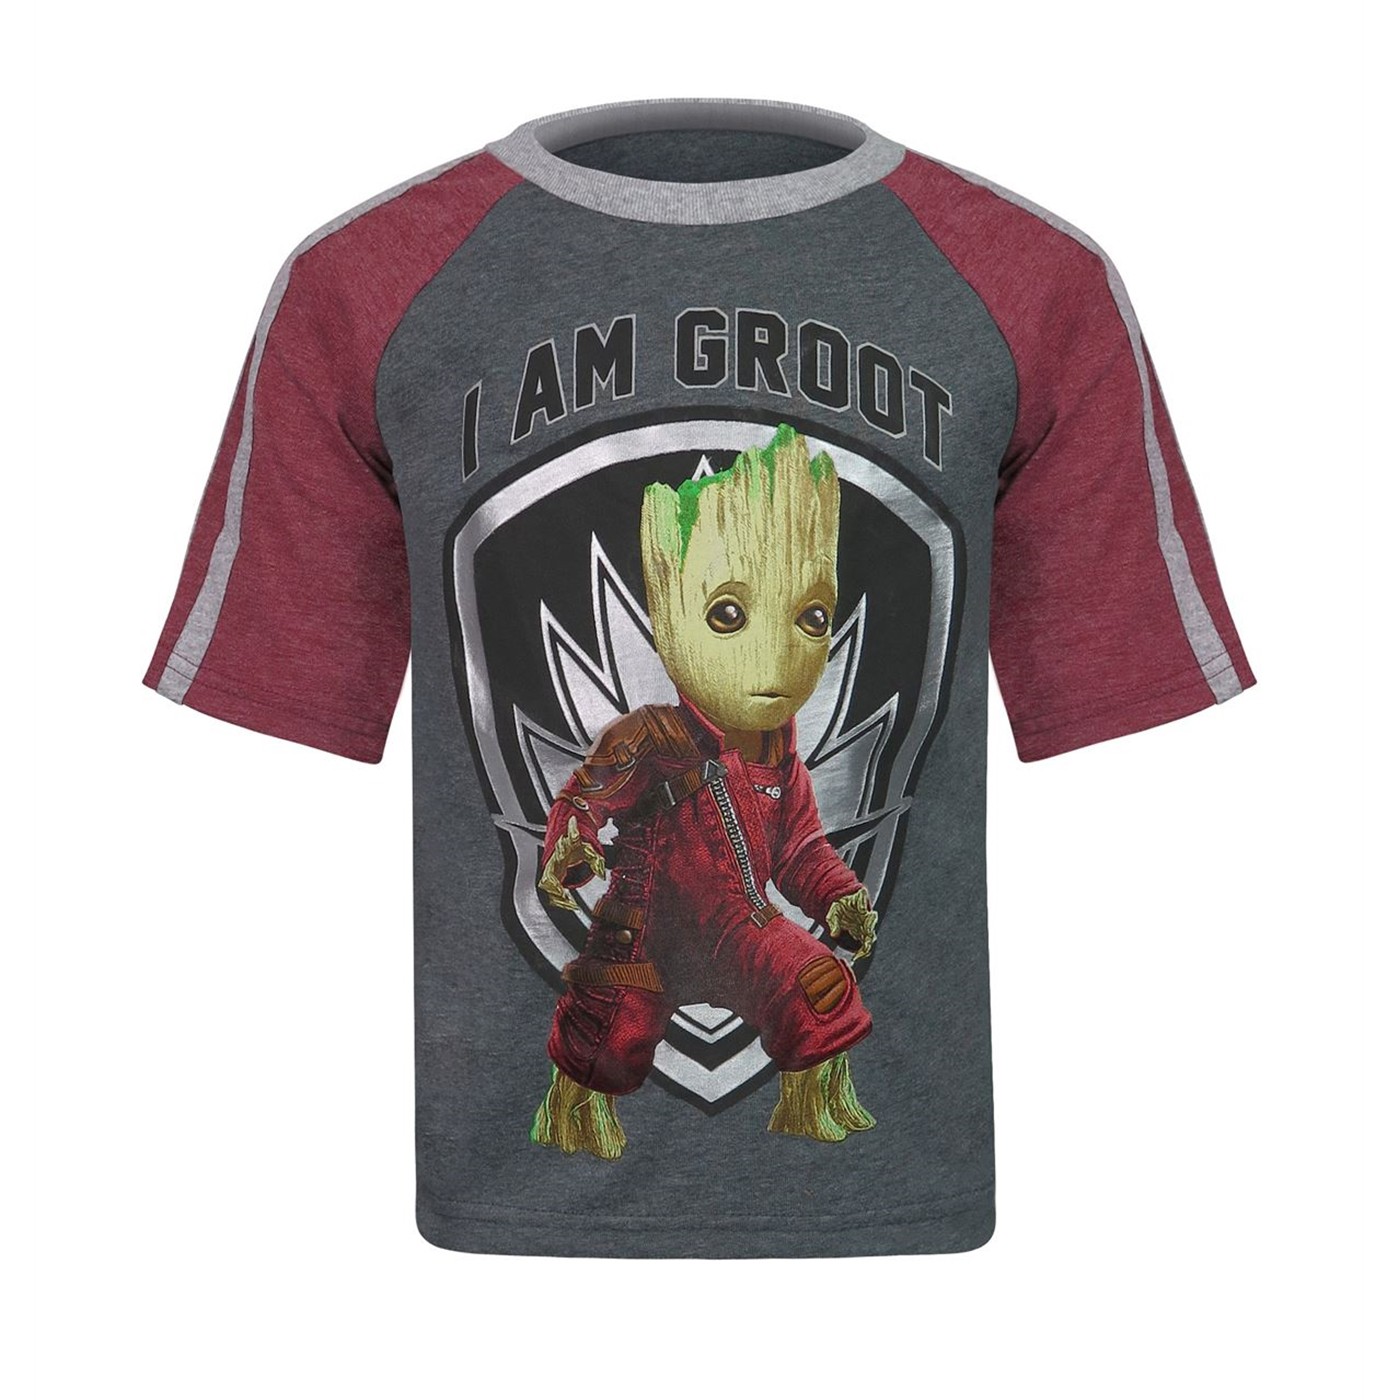 GOTG Baby Groot in Ravager Outfit Kids T-Shirt